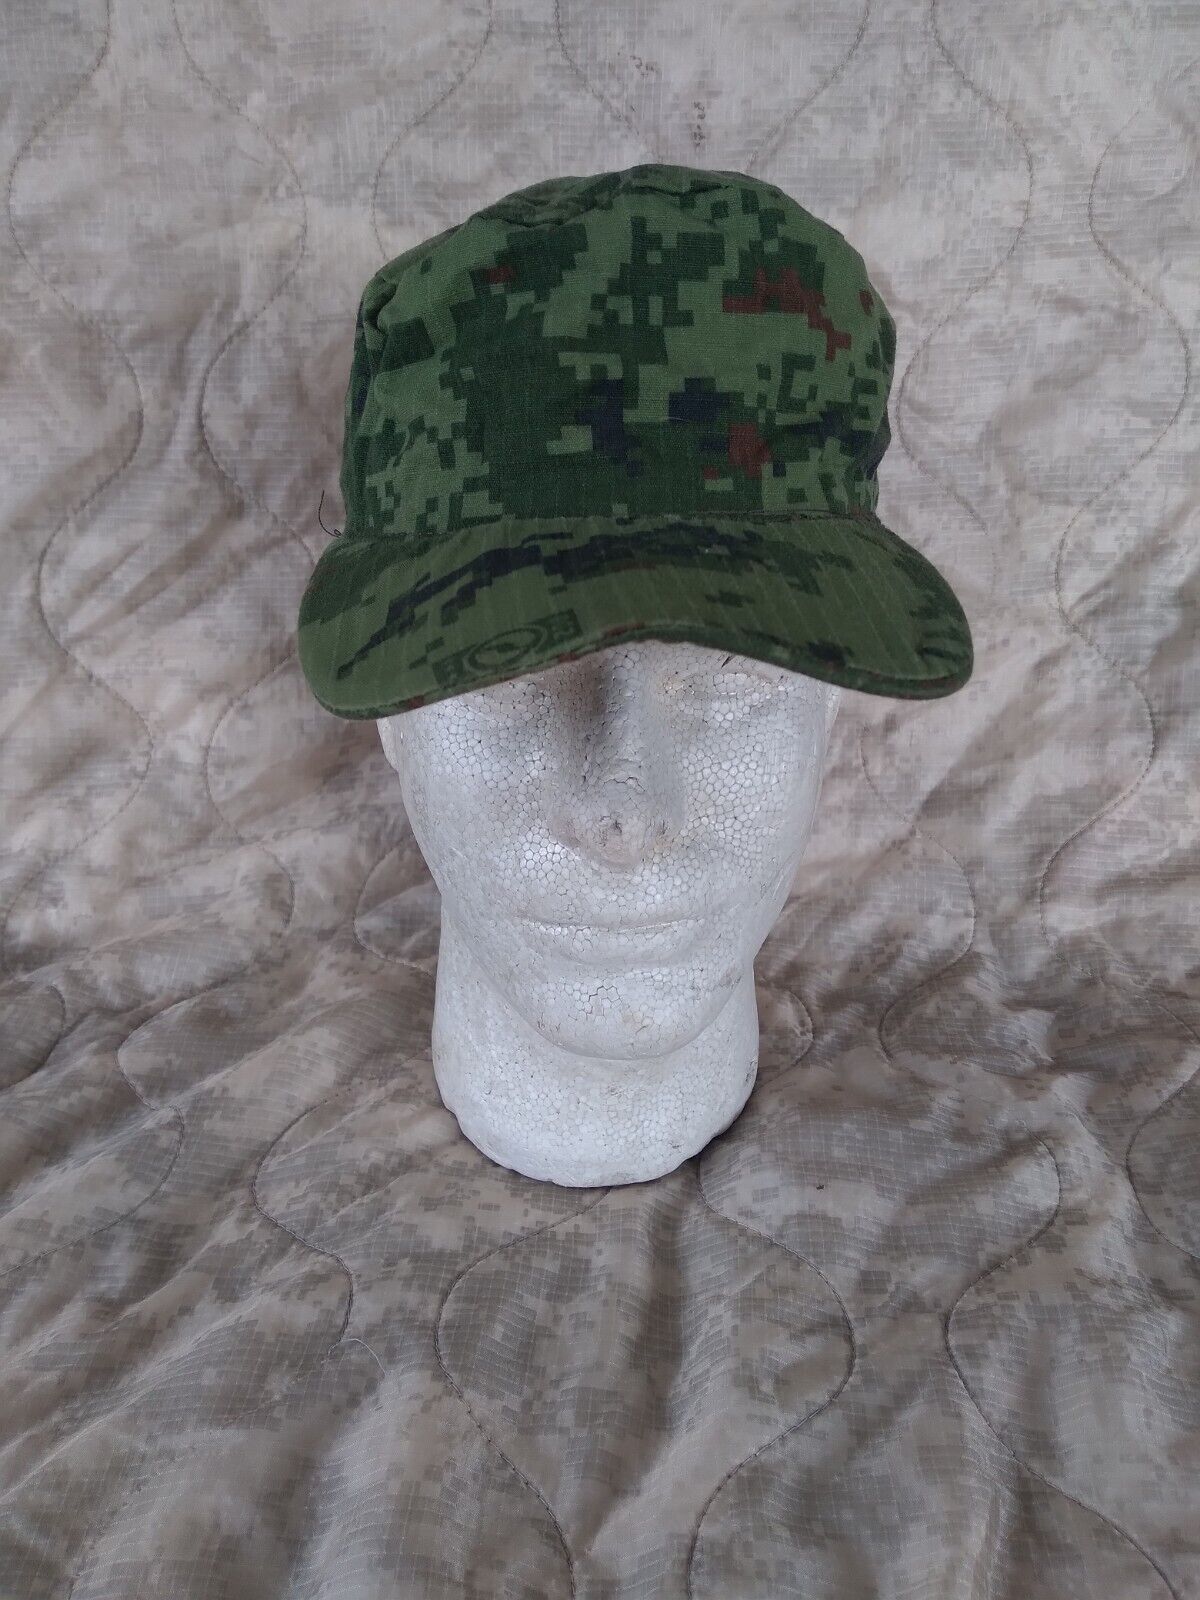 Mexican Army War on Drugs Digital Camo Field Cap. Size 52, Rare